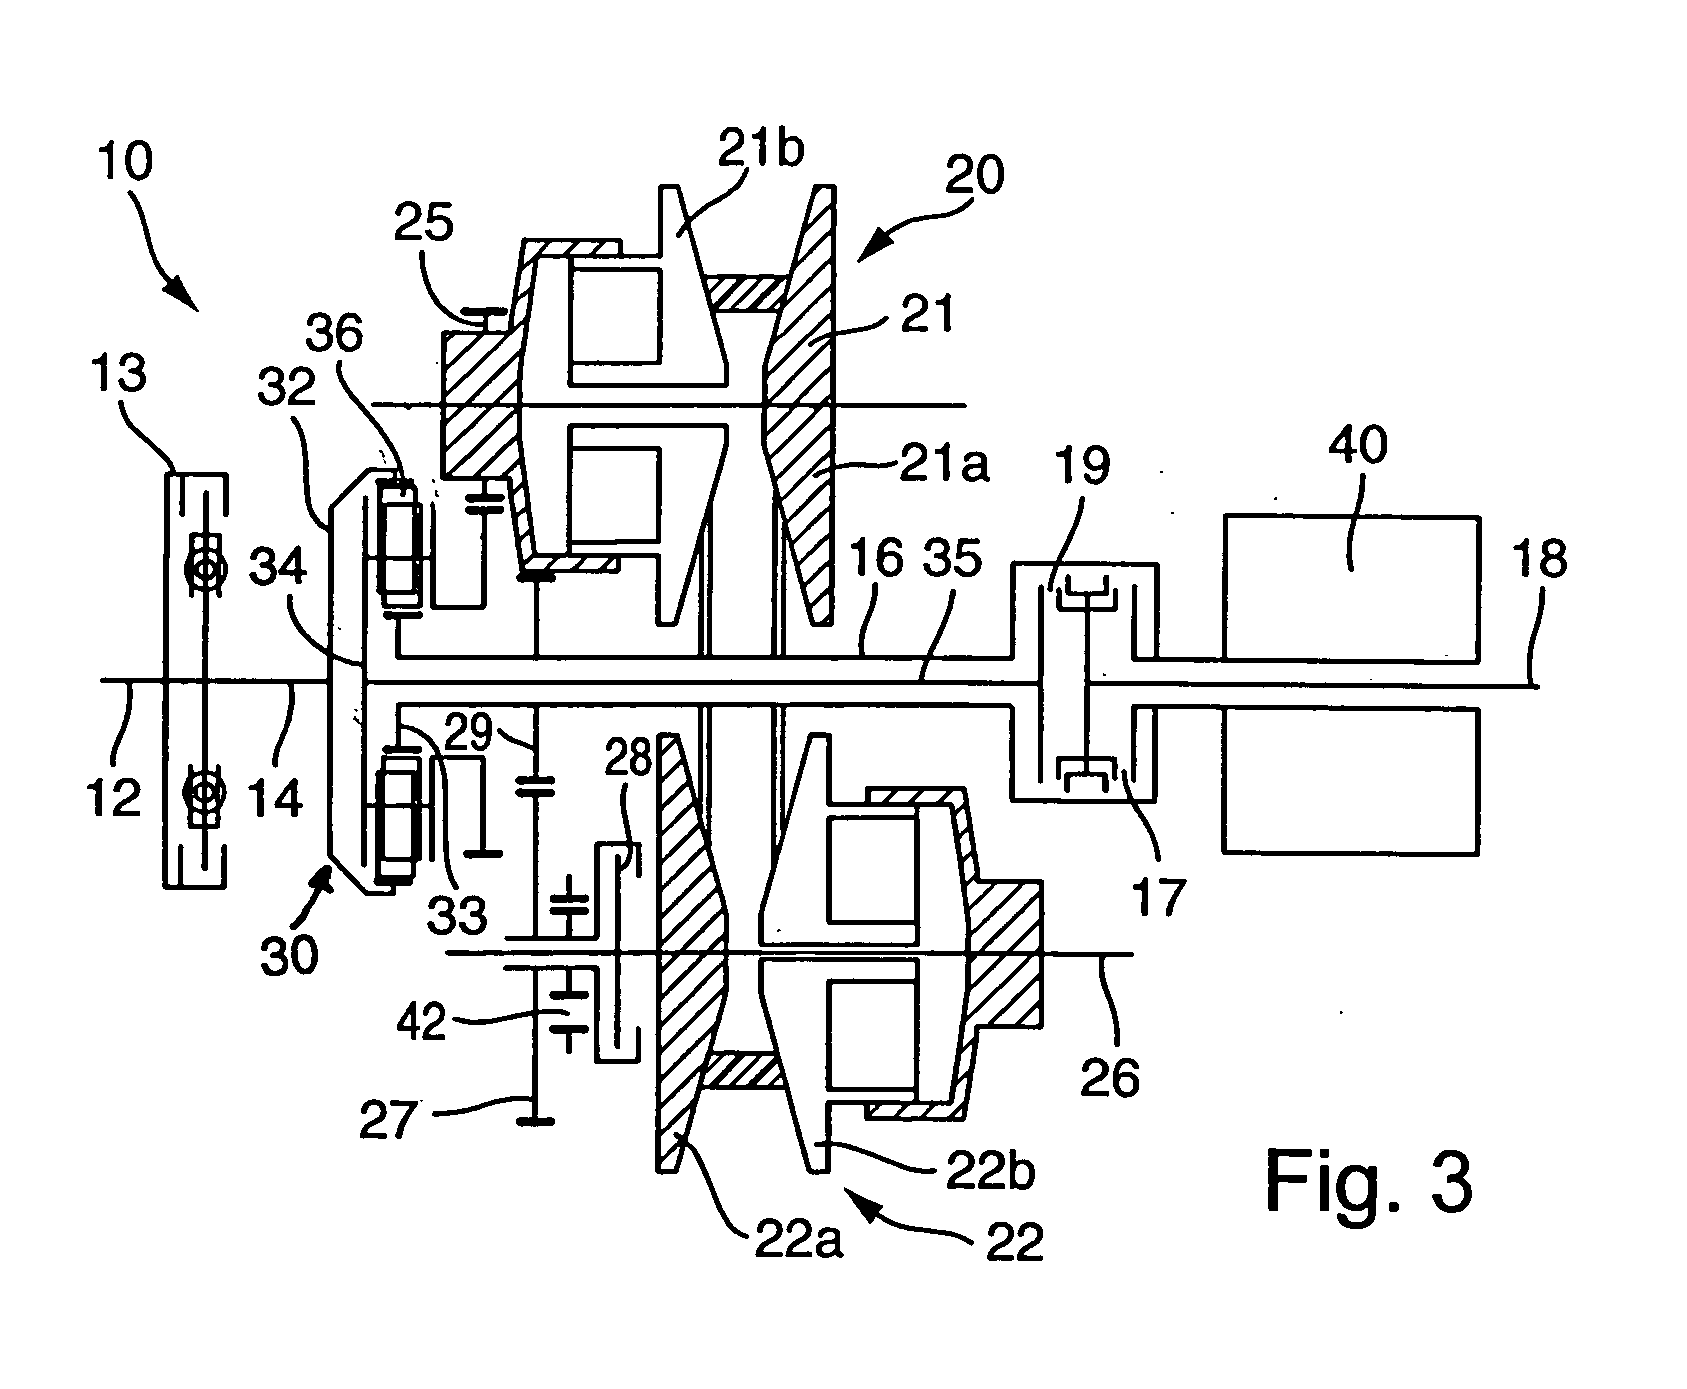 Power-branched transmission having a plurality of transmission ratio ranges with continuously variable transmission ratio